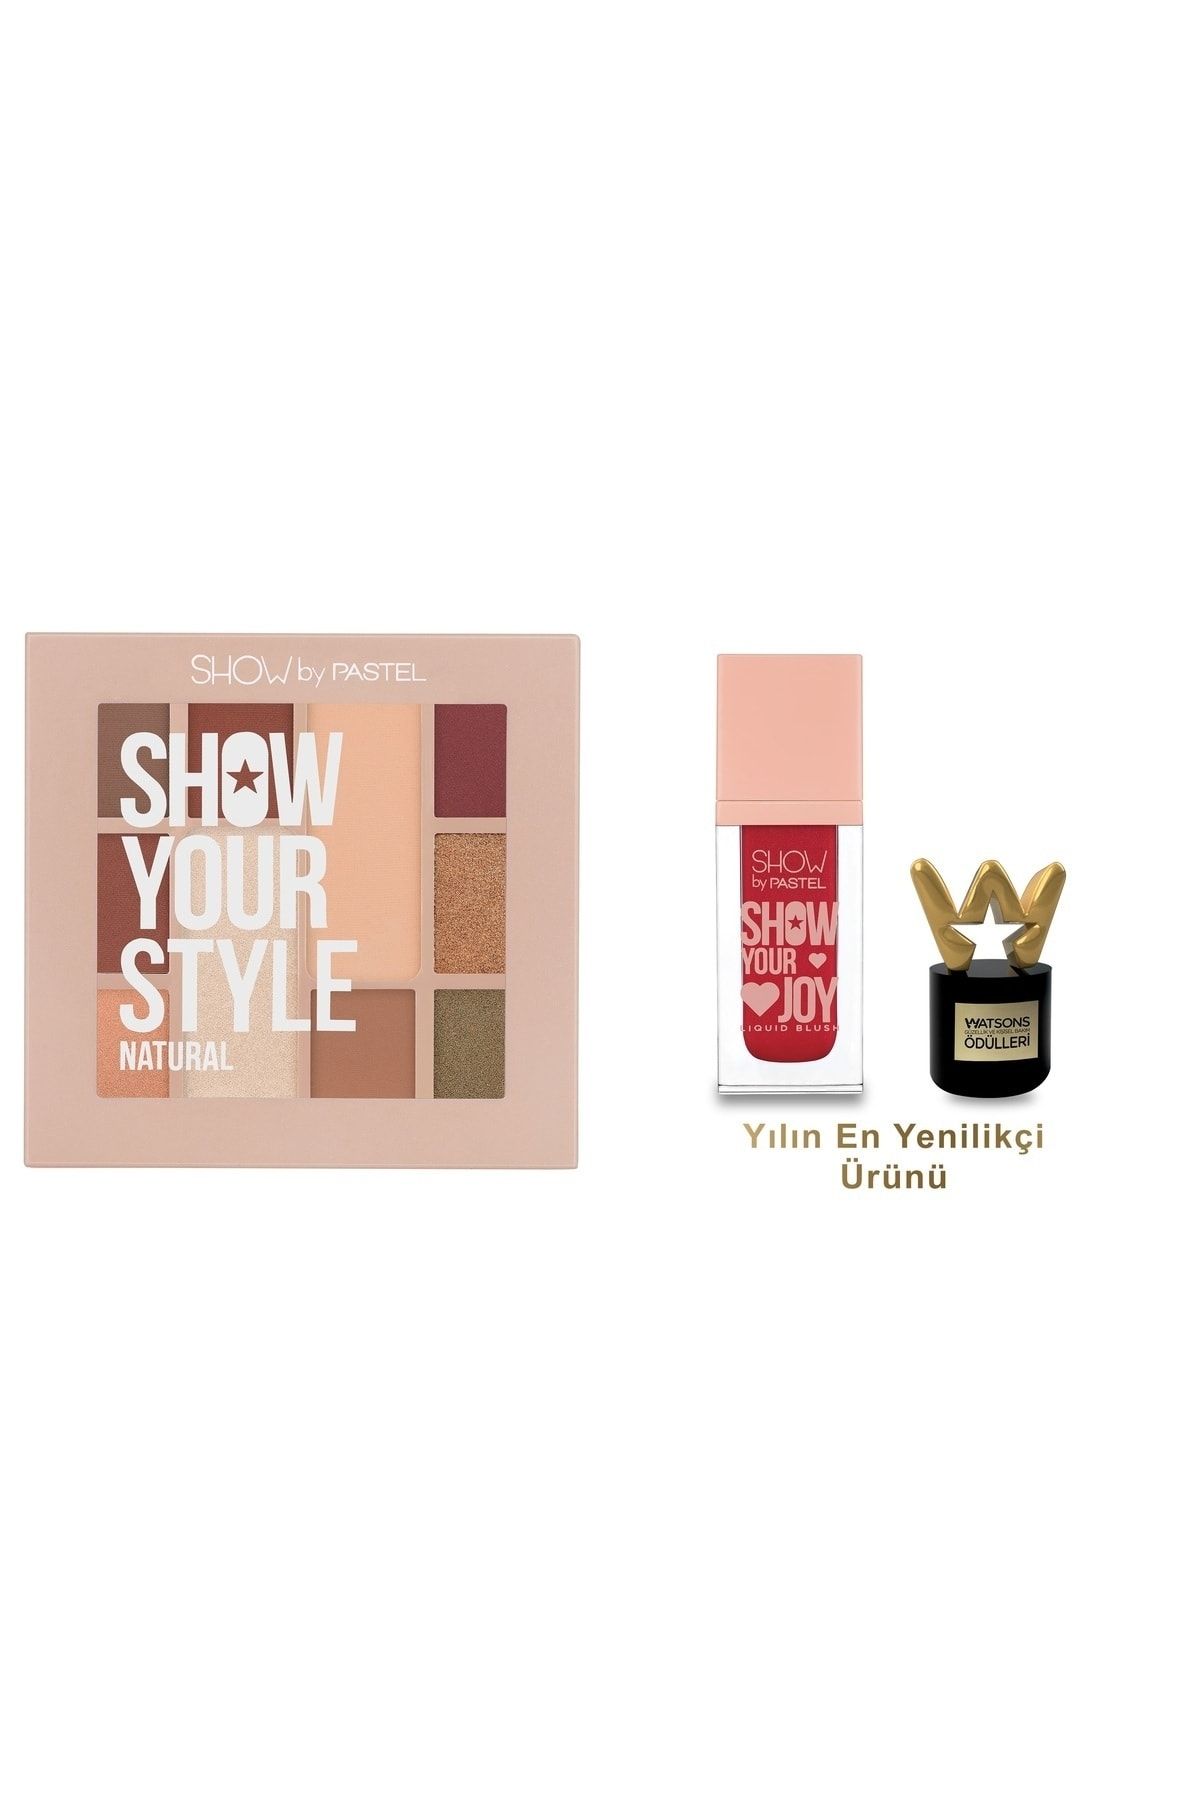 Pastel By Show Your Style Far Nature 464 +SHOW BY PASTEL SHOW YOUR JOY LIQUID BLUSH 52